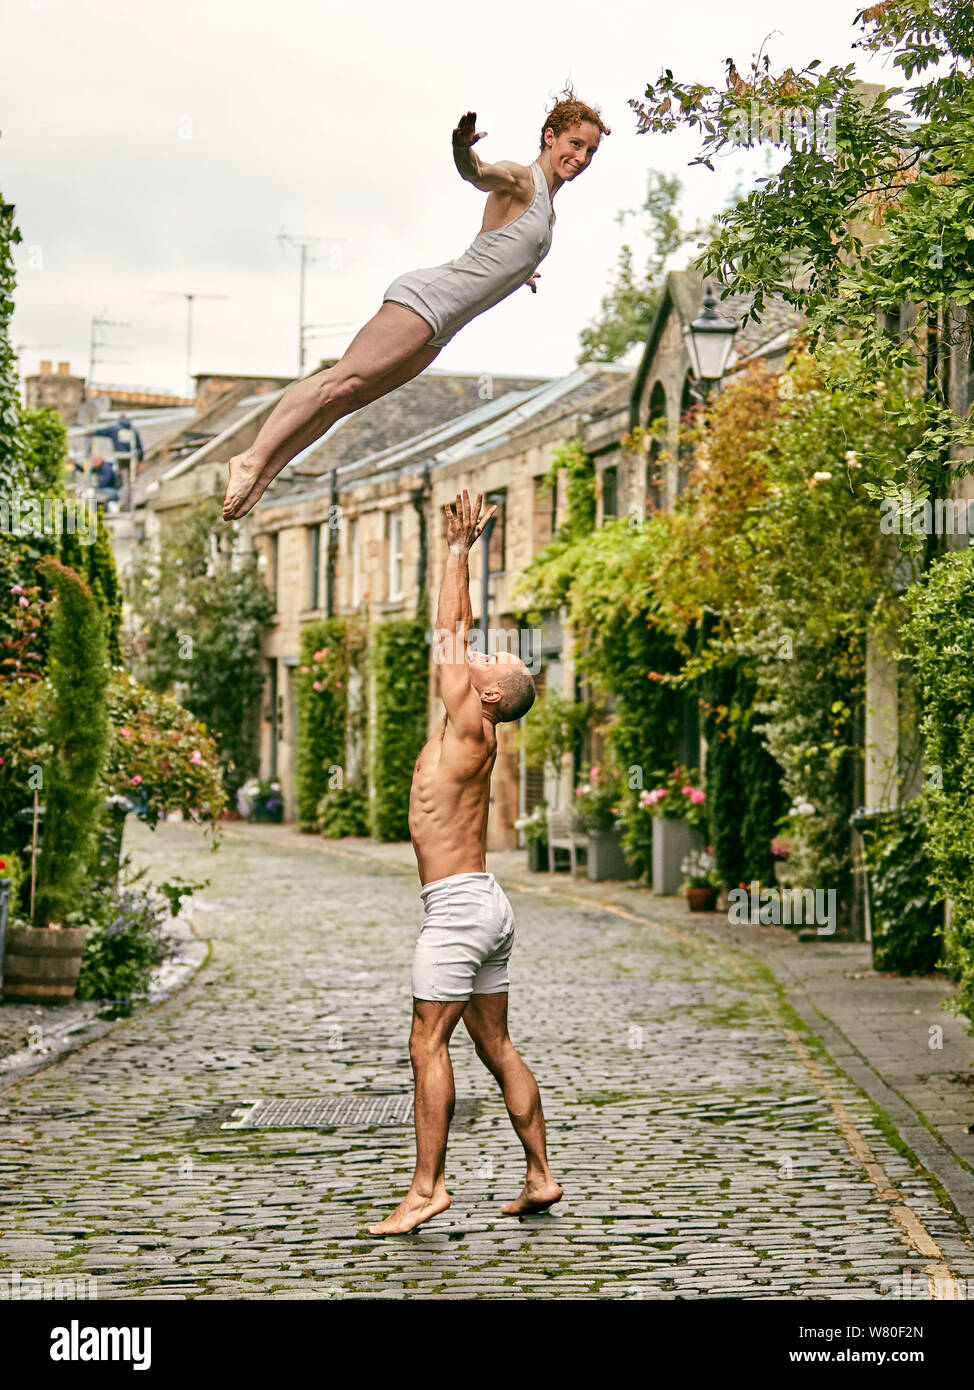 Edinburgh, Scotland, United Kingdom, 7 August 2019. Edinburgh Festival Fringe 2019: Photocall for Nikki Rummer and JD Broussé (Nikki & JD), an acrobatic circus duo with skills in circus and contemporary dance who perform in ‘Knot’, part of the British Council Edinburgh Showcase 2019, using hand-to-hand circus skills to convey a journey through the struggles of commitment. Photographed in Circus Lane in Edinburghs New Town Stock Photo